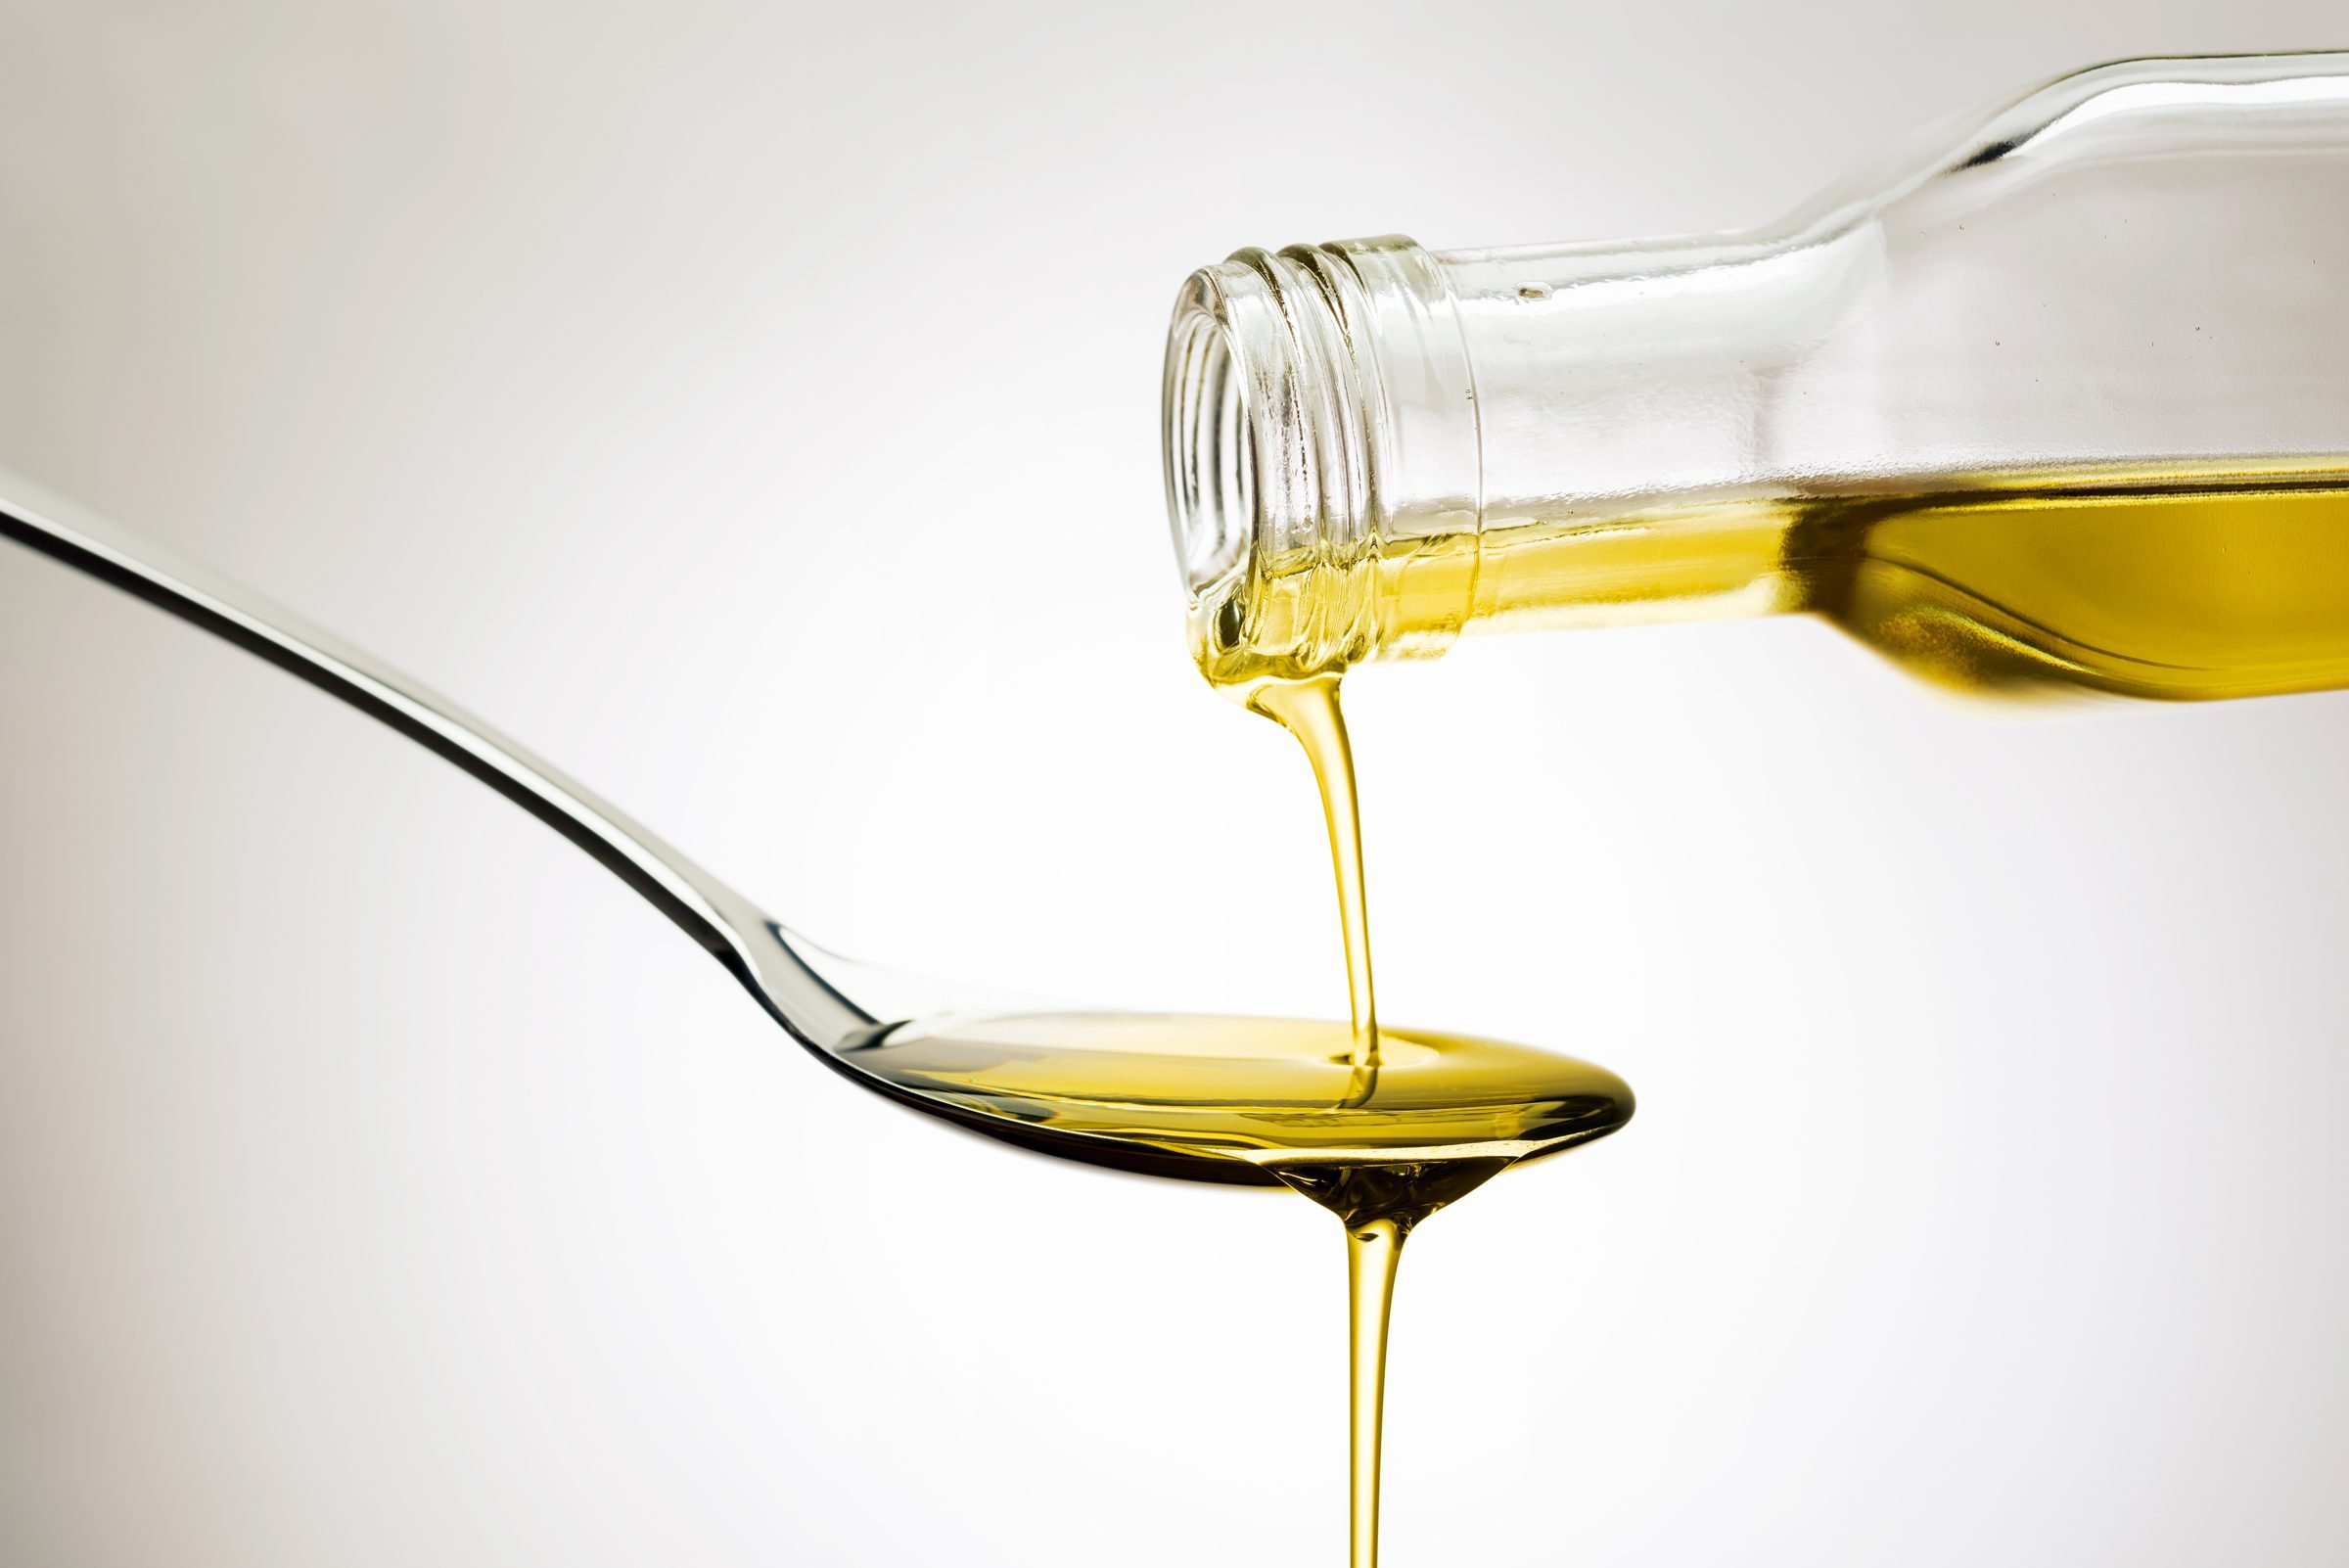 When You Use Olive Oil and Other All-Natural Oils as Moisturizer...Do You Absorb the Fat Content? An Obesity Doctor Explains